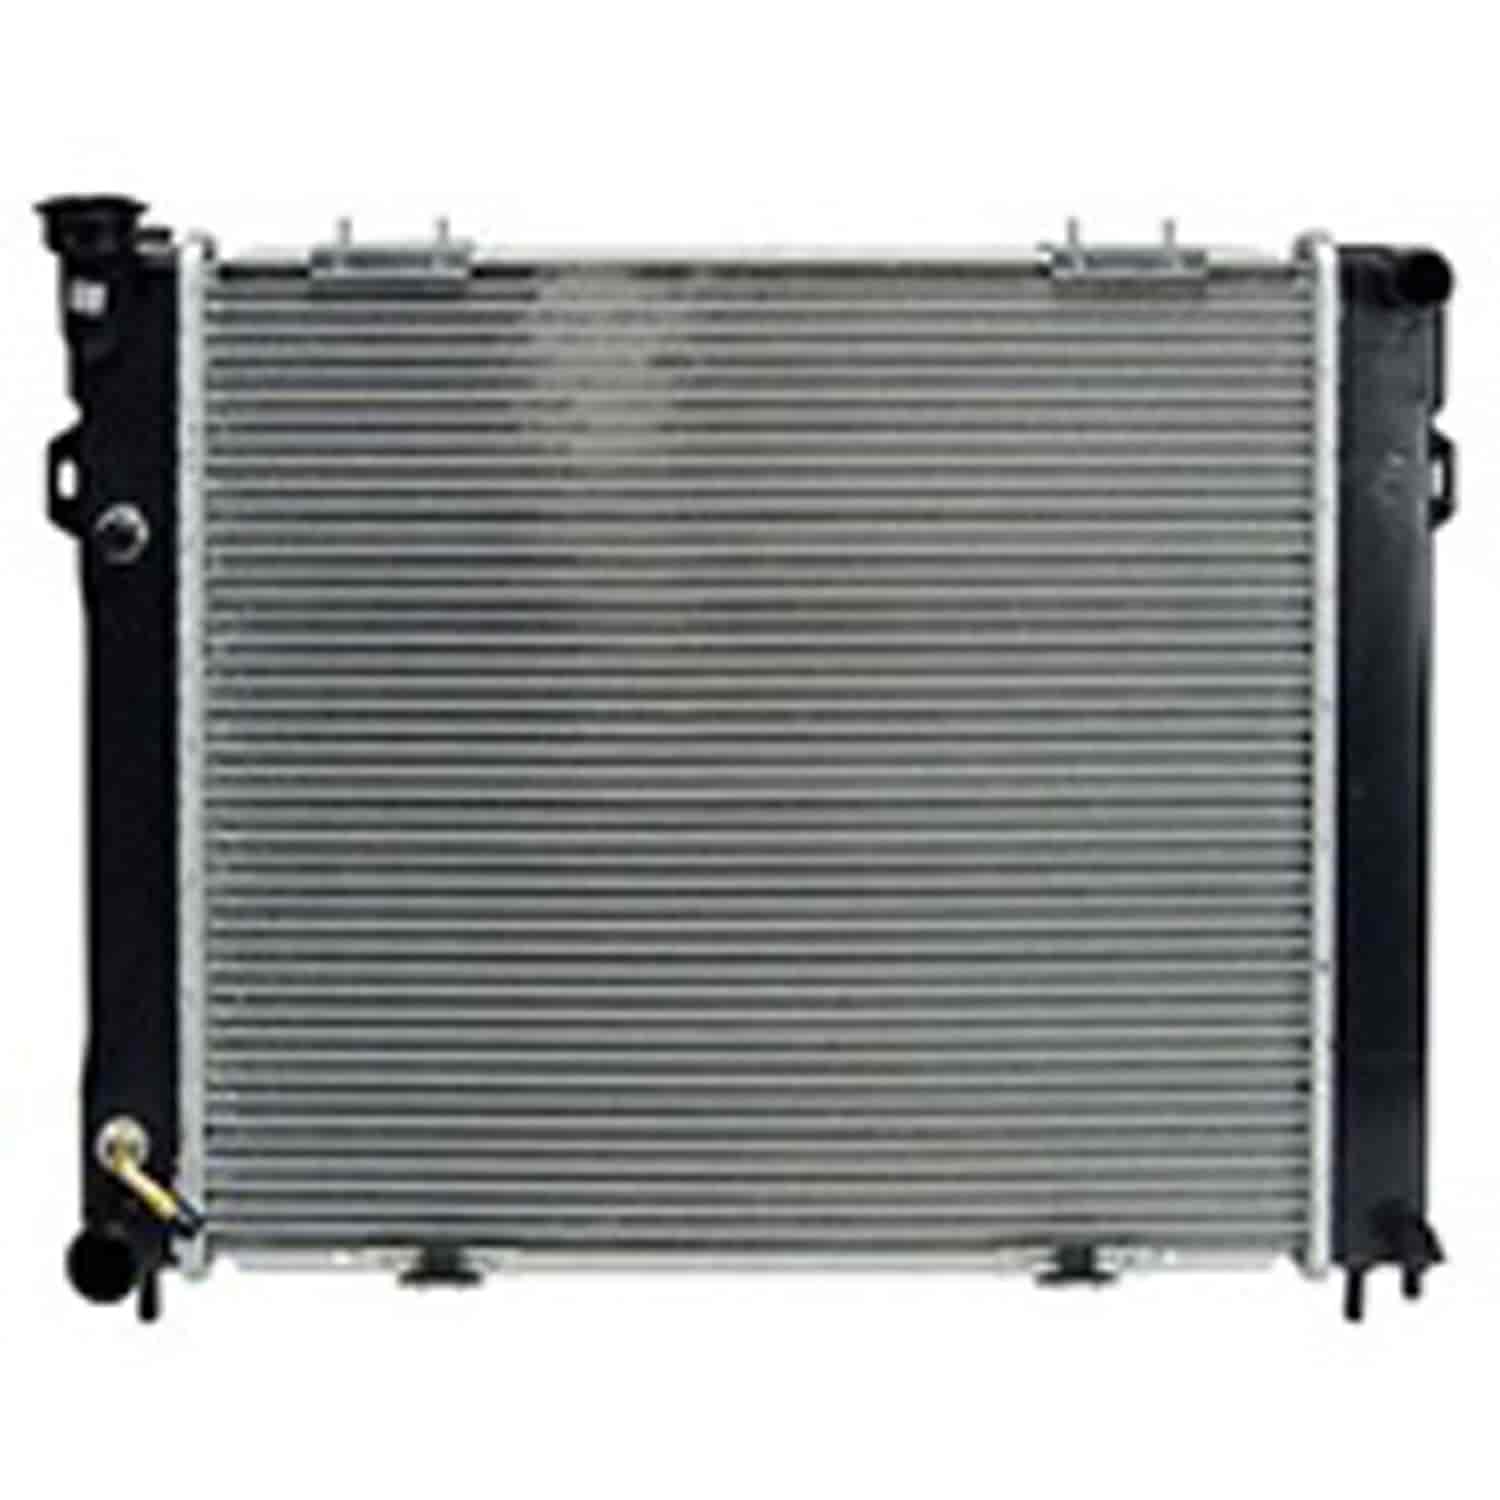 This 1 row radiator from Omix-ADA fits 93-94 Jeep Grand Cherokee ZJ.